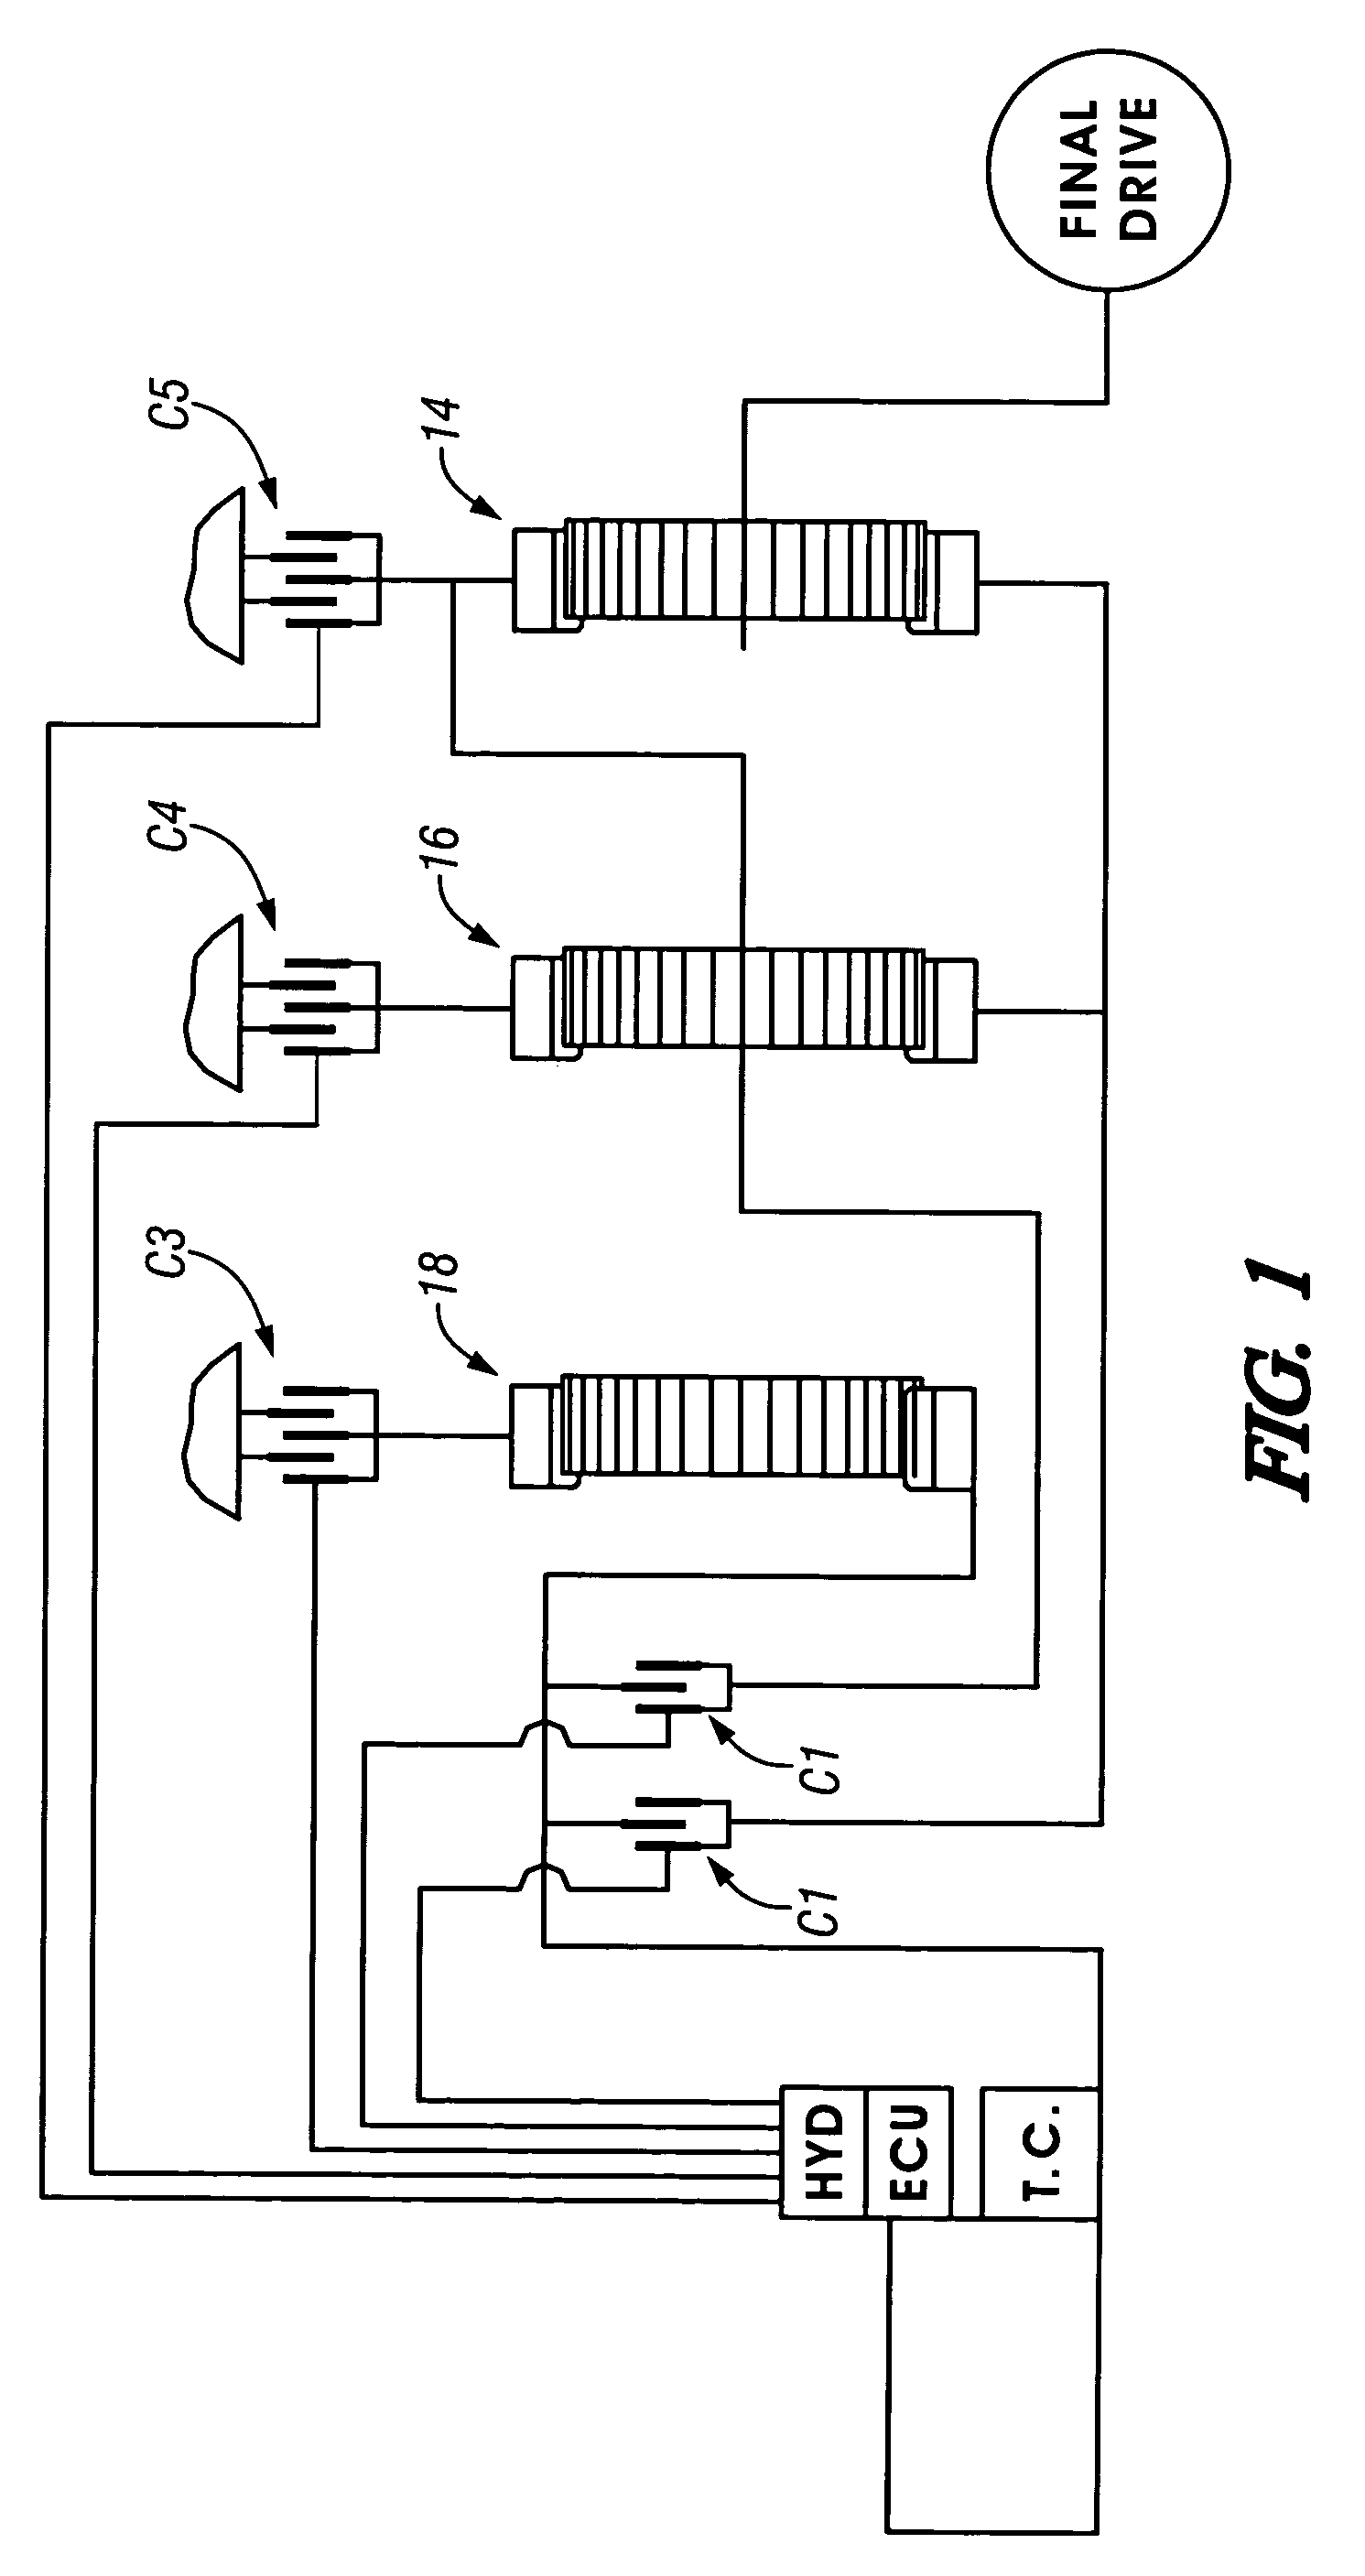 Fly-by-wire limp home and multi-plex system